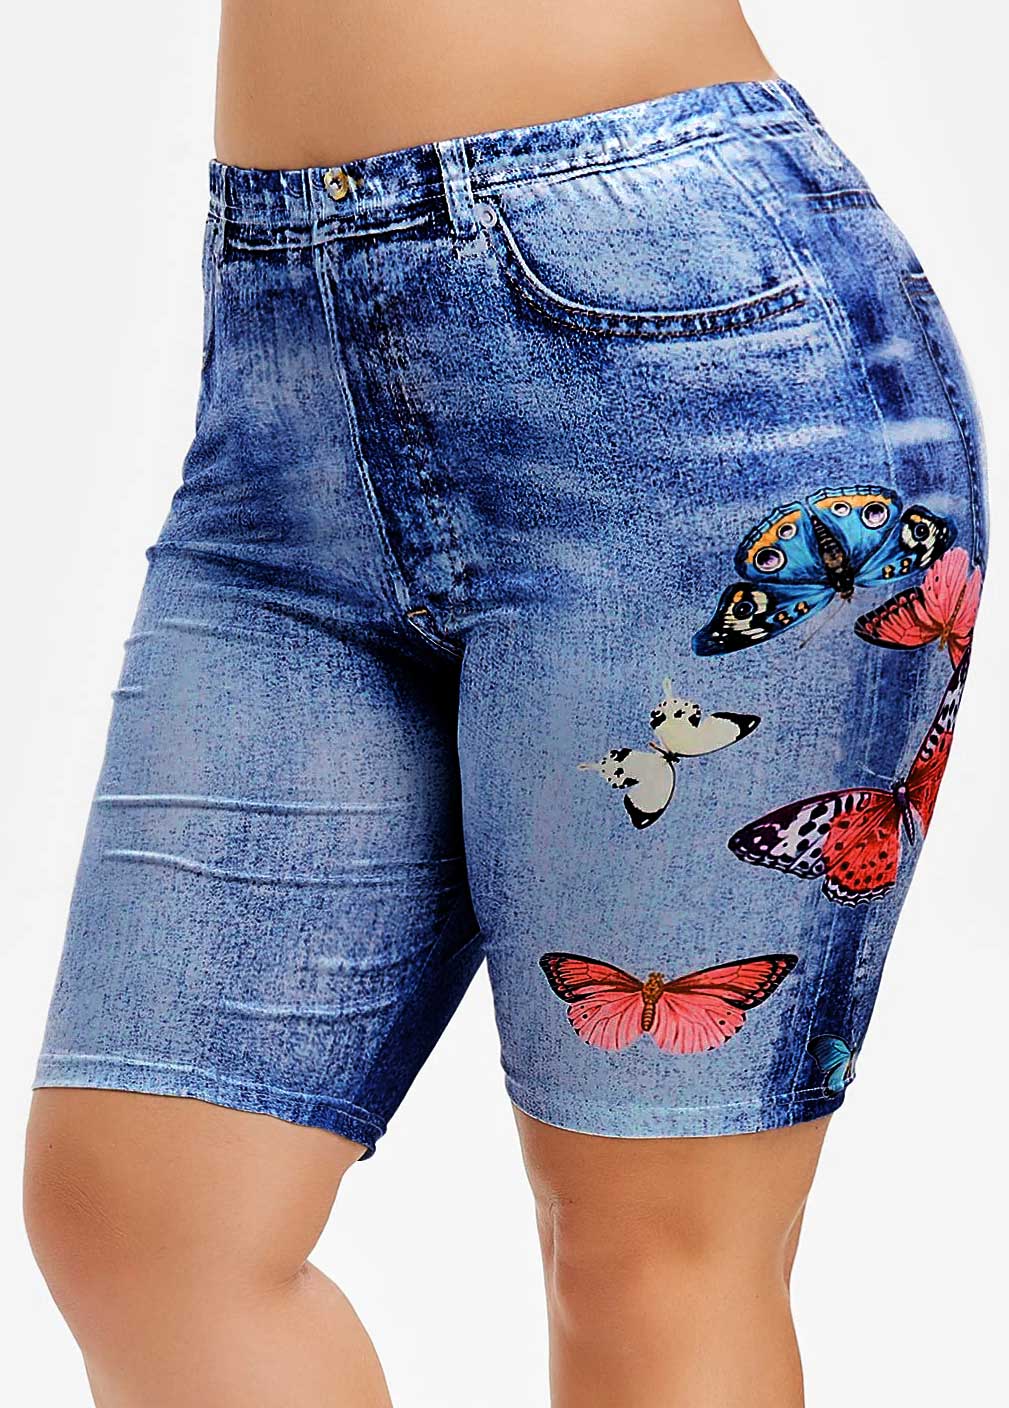 Butterfly Print High Waisted Plus Size Denim Shorts